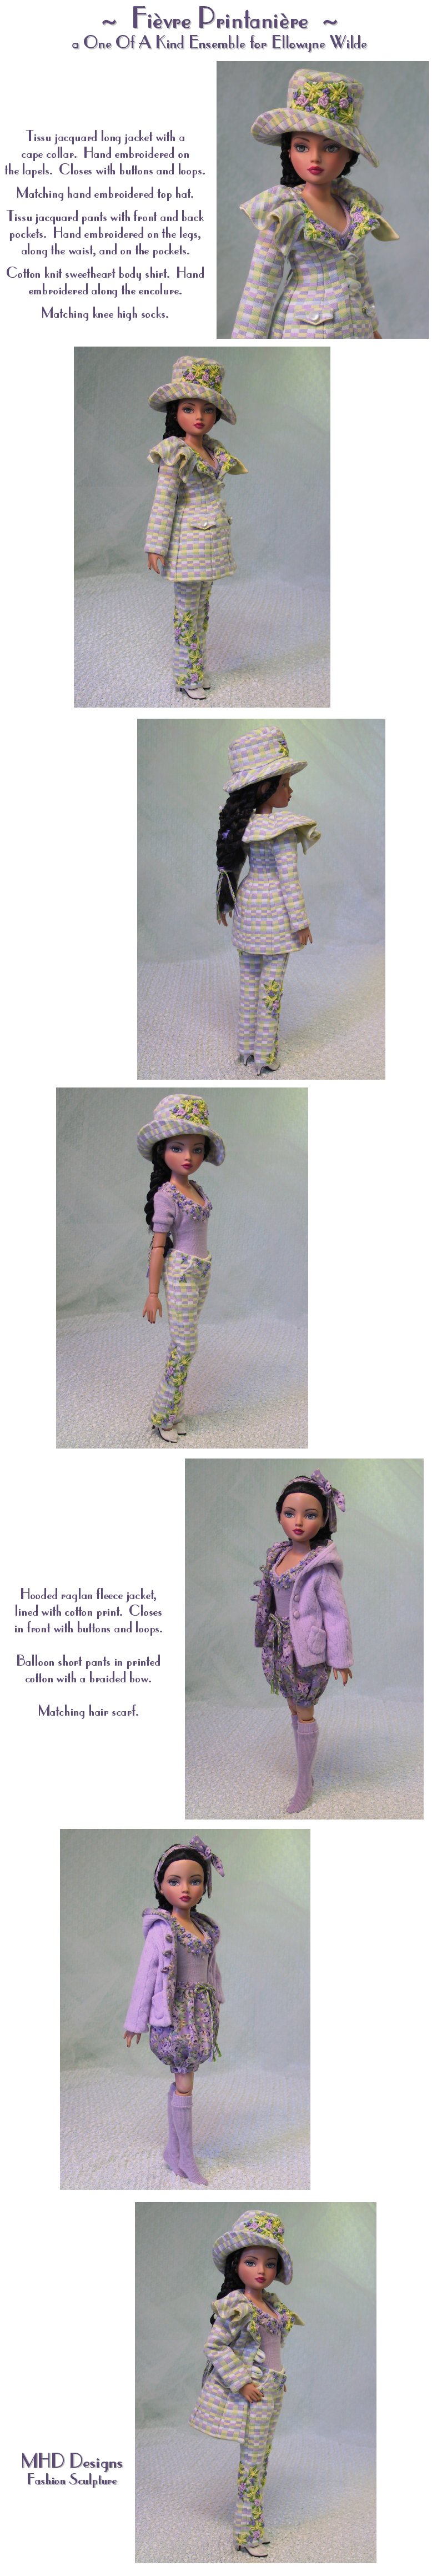 Spring Fever - an OOAK Extended Ensemble by MHD Designs - High Resolution 

Photographs, your patience is appreciated!